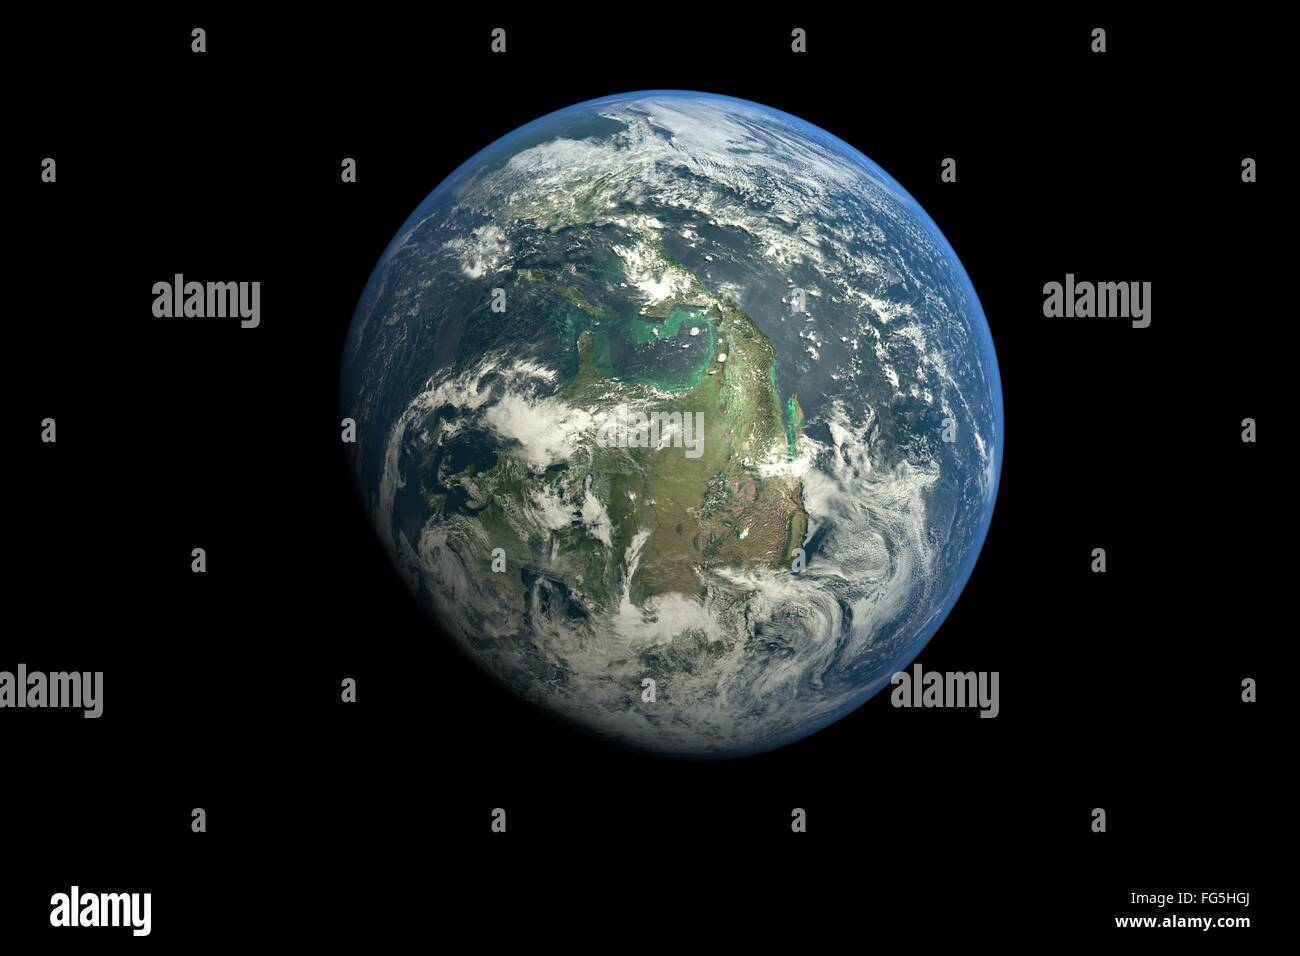 Planet Earth Against Black Background Stock Photo